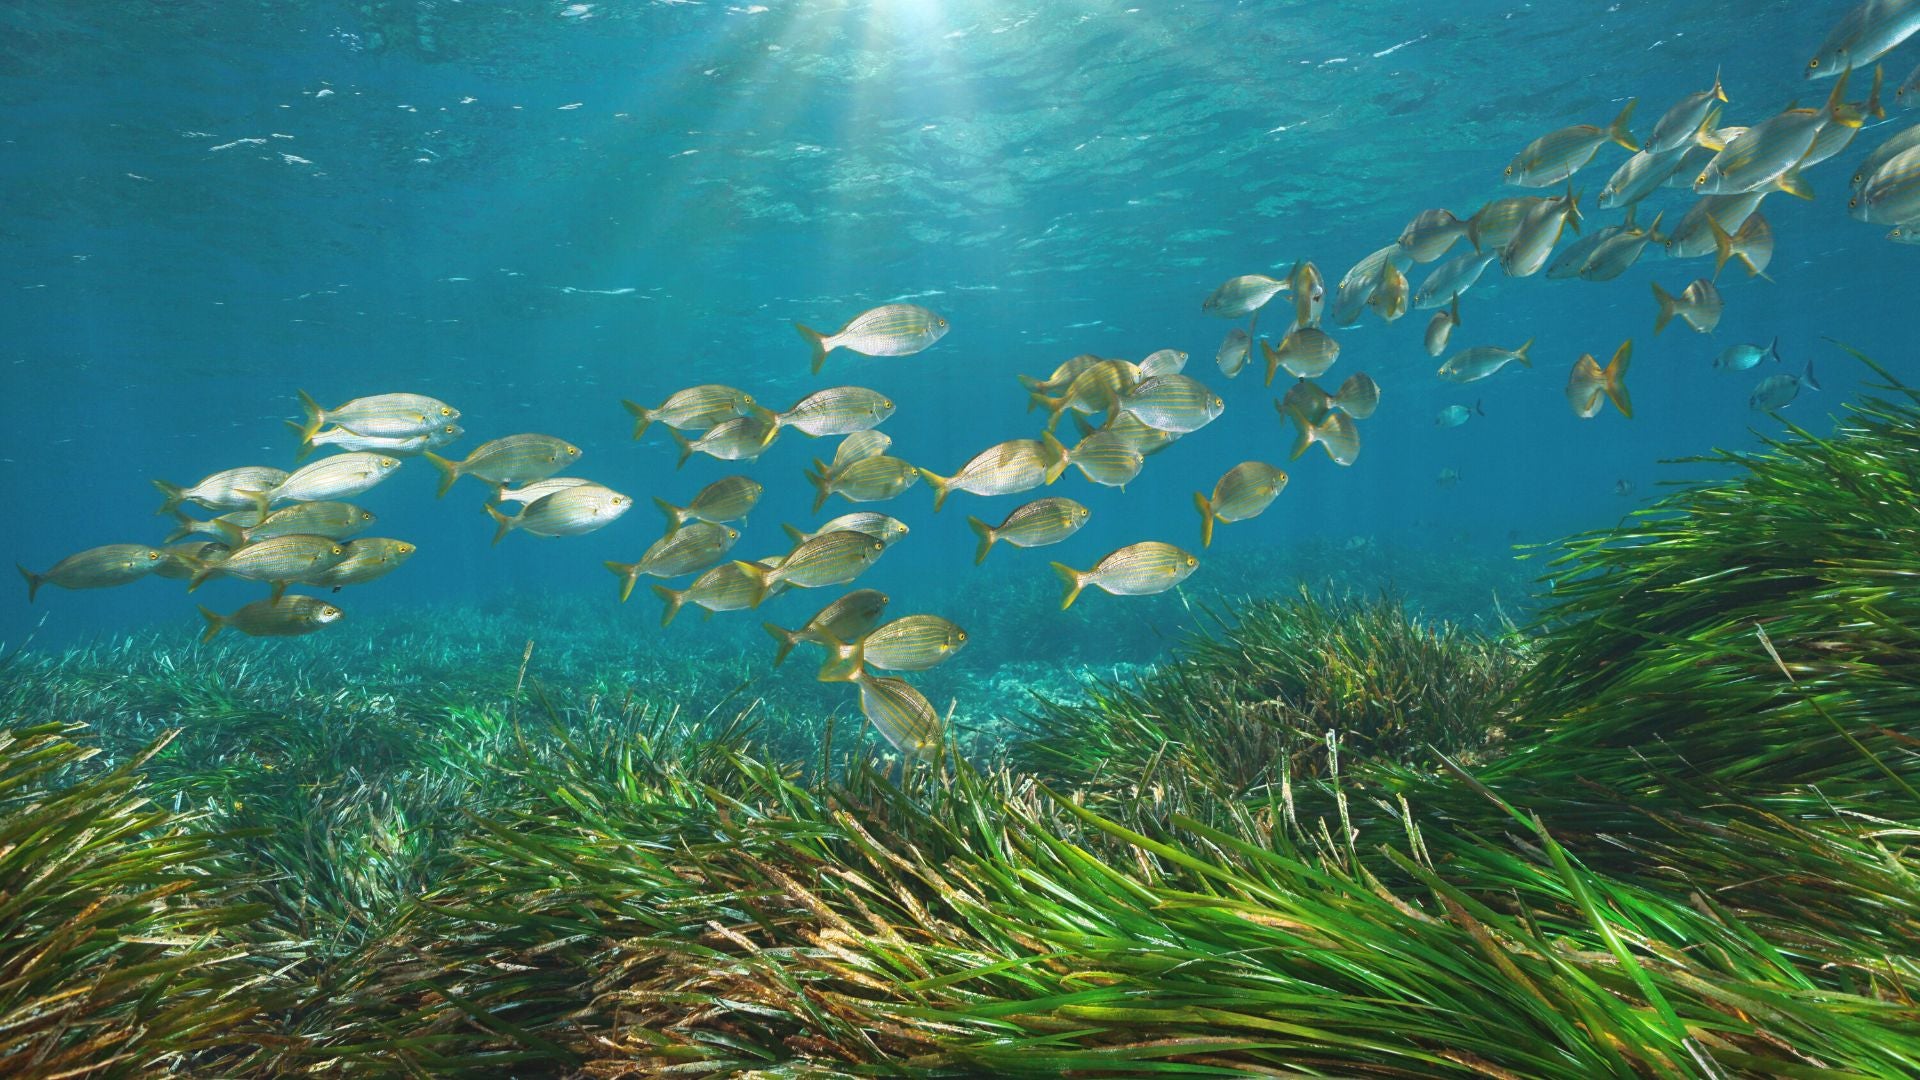 Fish swimming above a seagrass meadow